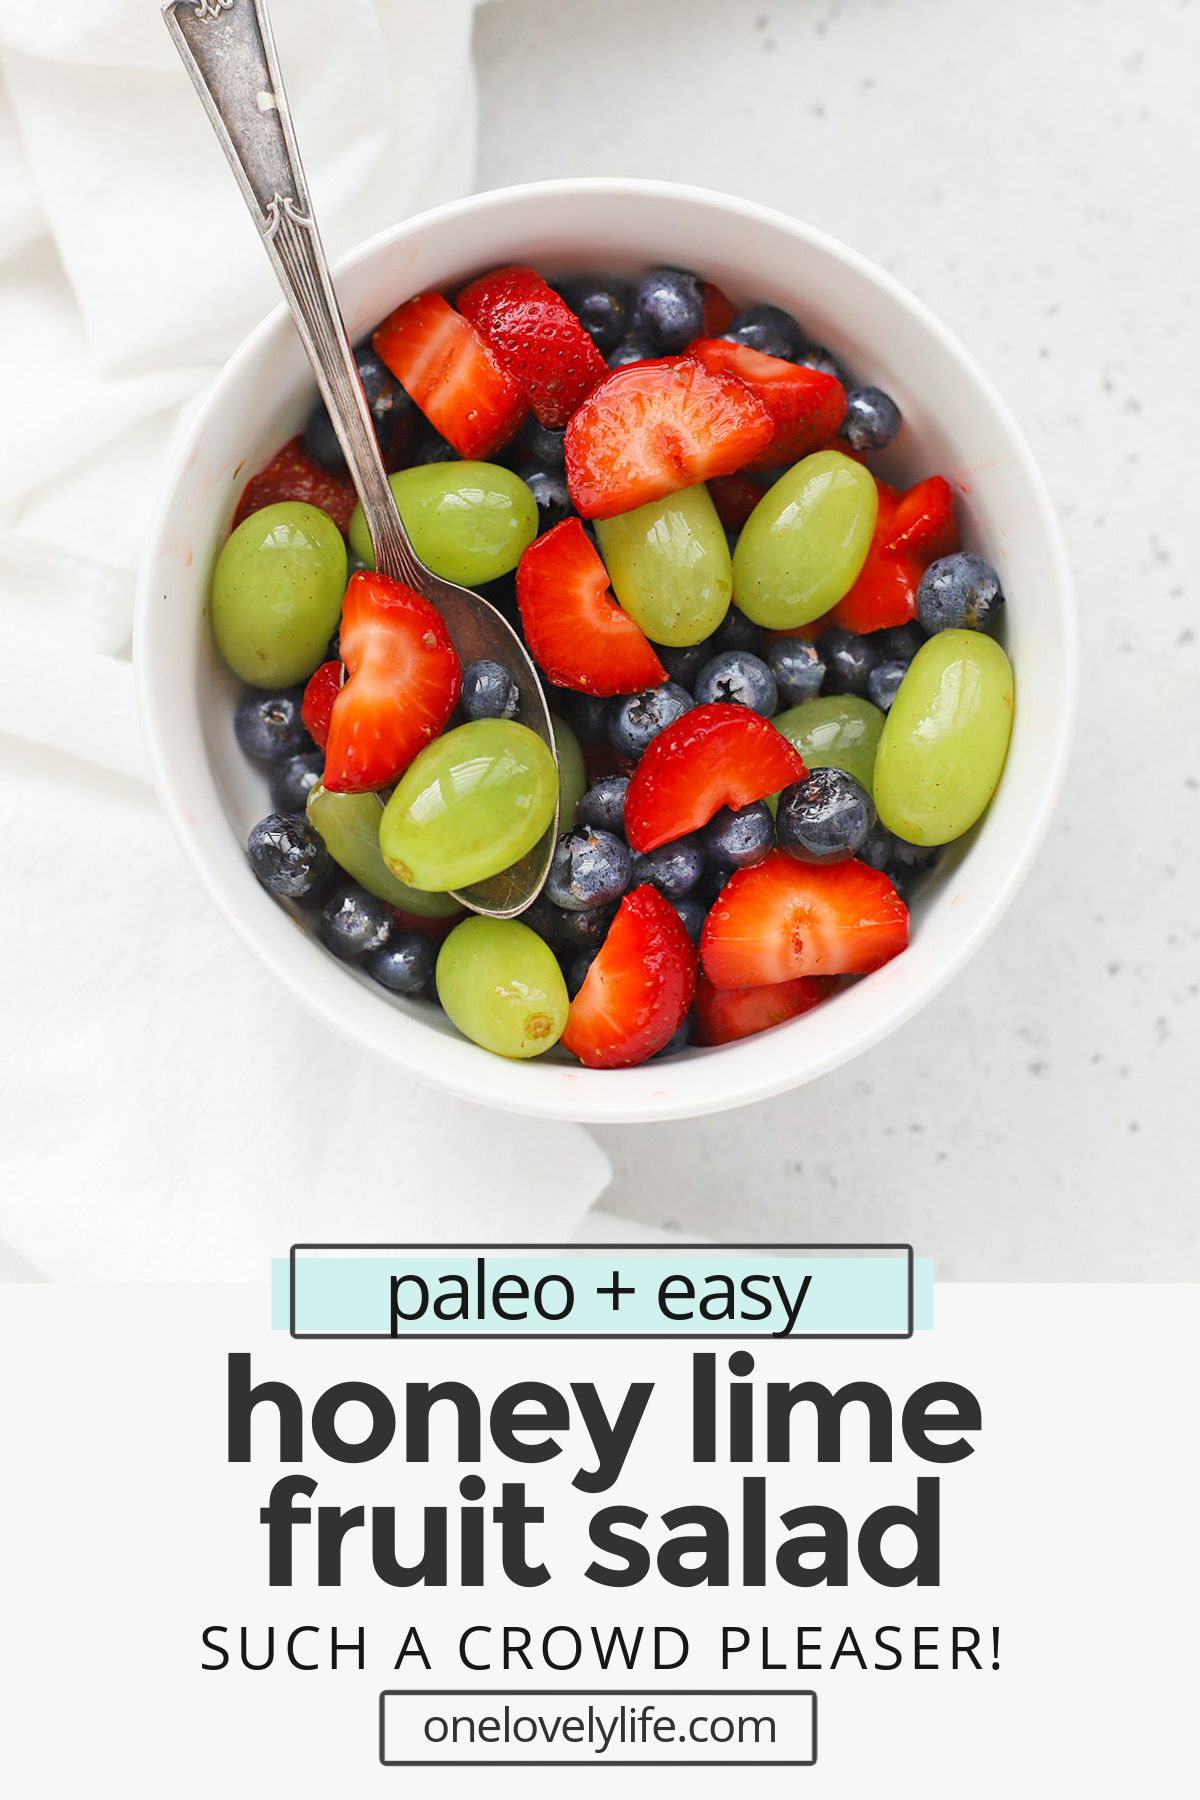 Honey Lime Fruit Salad is my favorite side dish. It's perfect for weeknight dinners, baby or wedding showers, barbecues, and more! // honey lime fruit salad recipe // healthy fruit salad // paleo fruit salad // fruit salad recipe // honey lime dressing #fruitsalad #honeylime #potluck #picnic #barbecue #sidedish #brunch #paleo